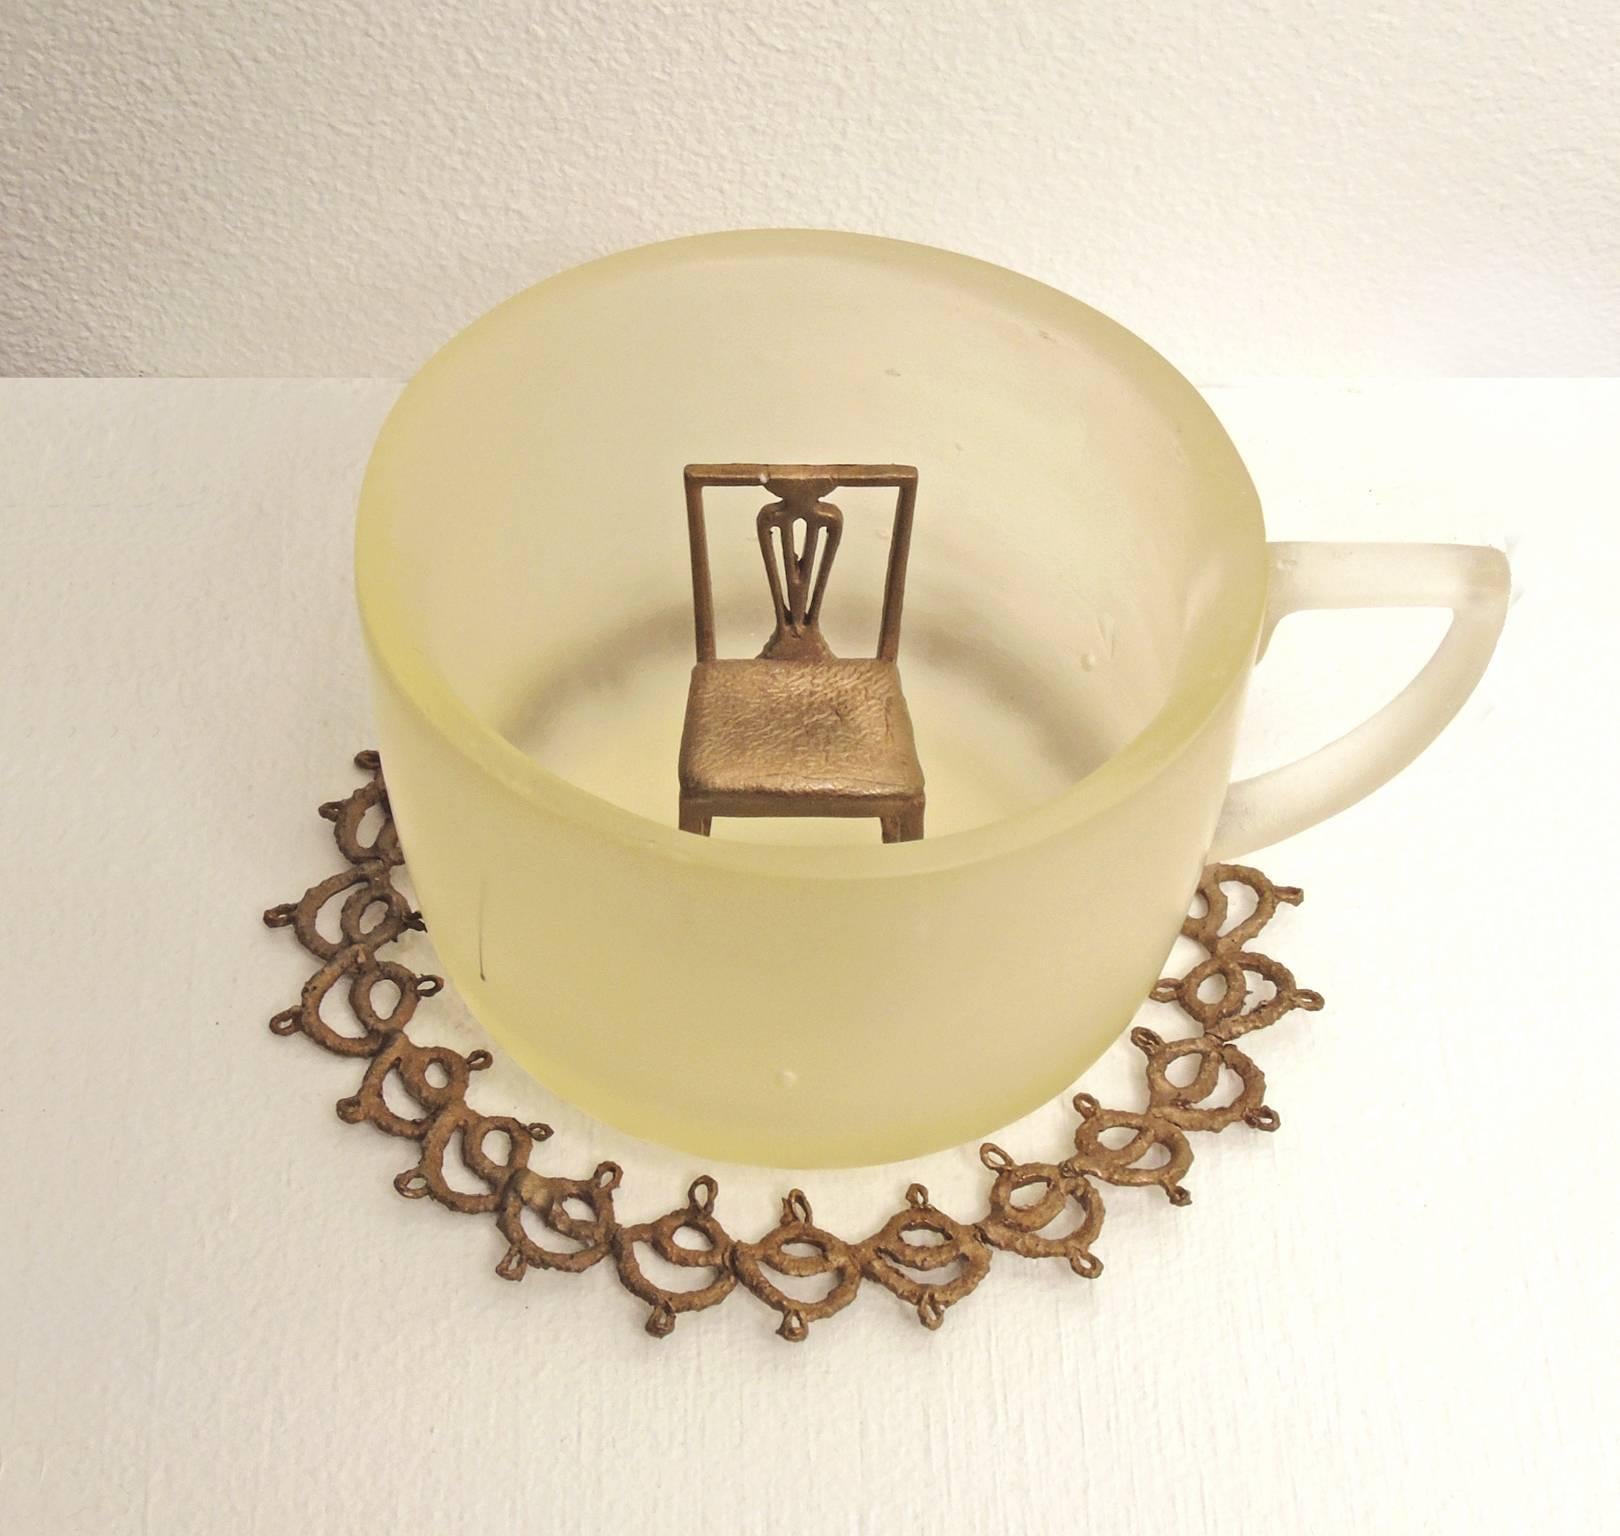 Thirst - cast pale yellow glass and bronze For Sale 1